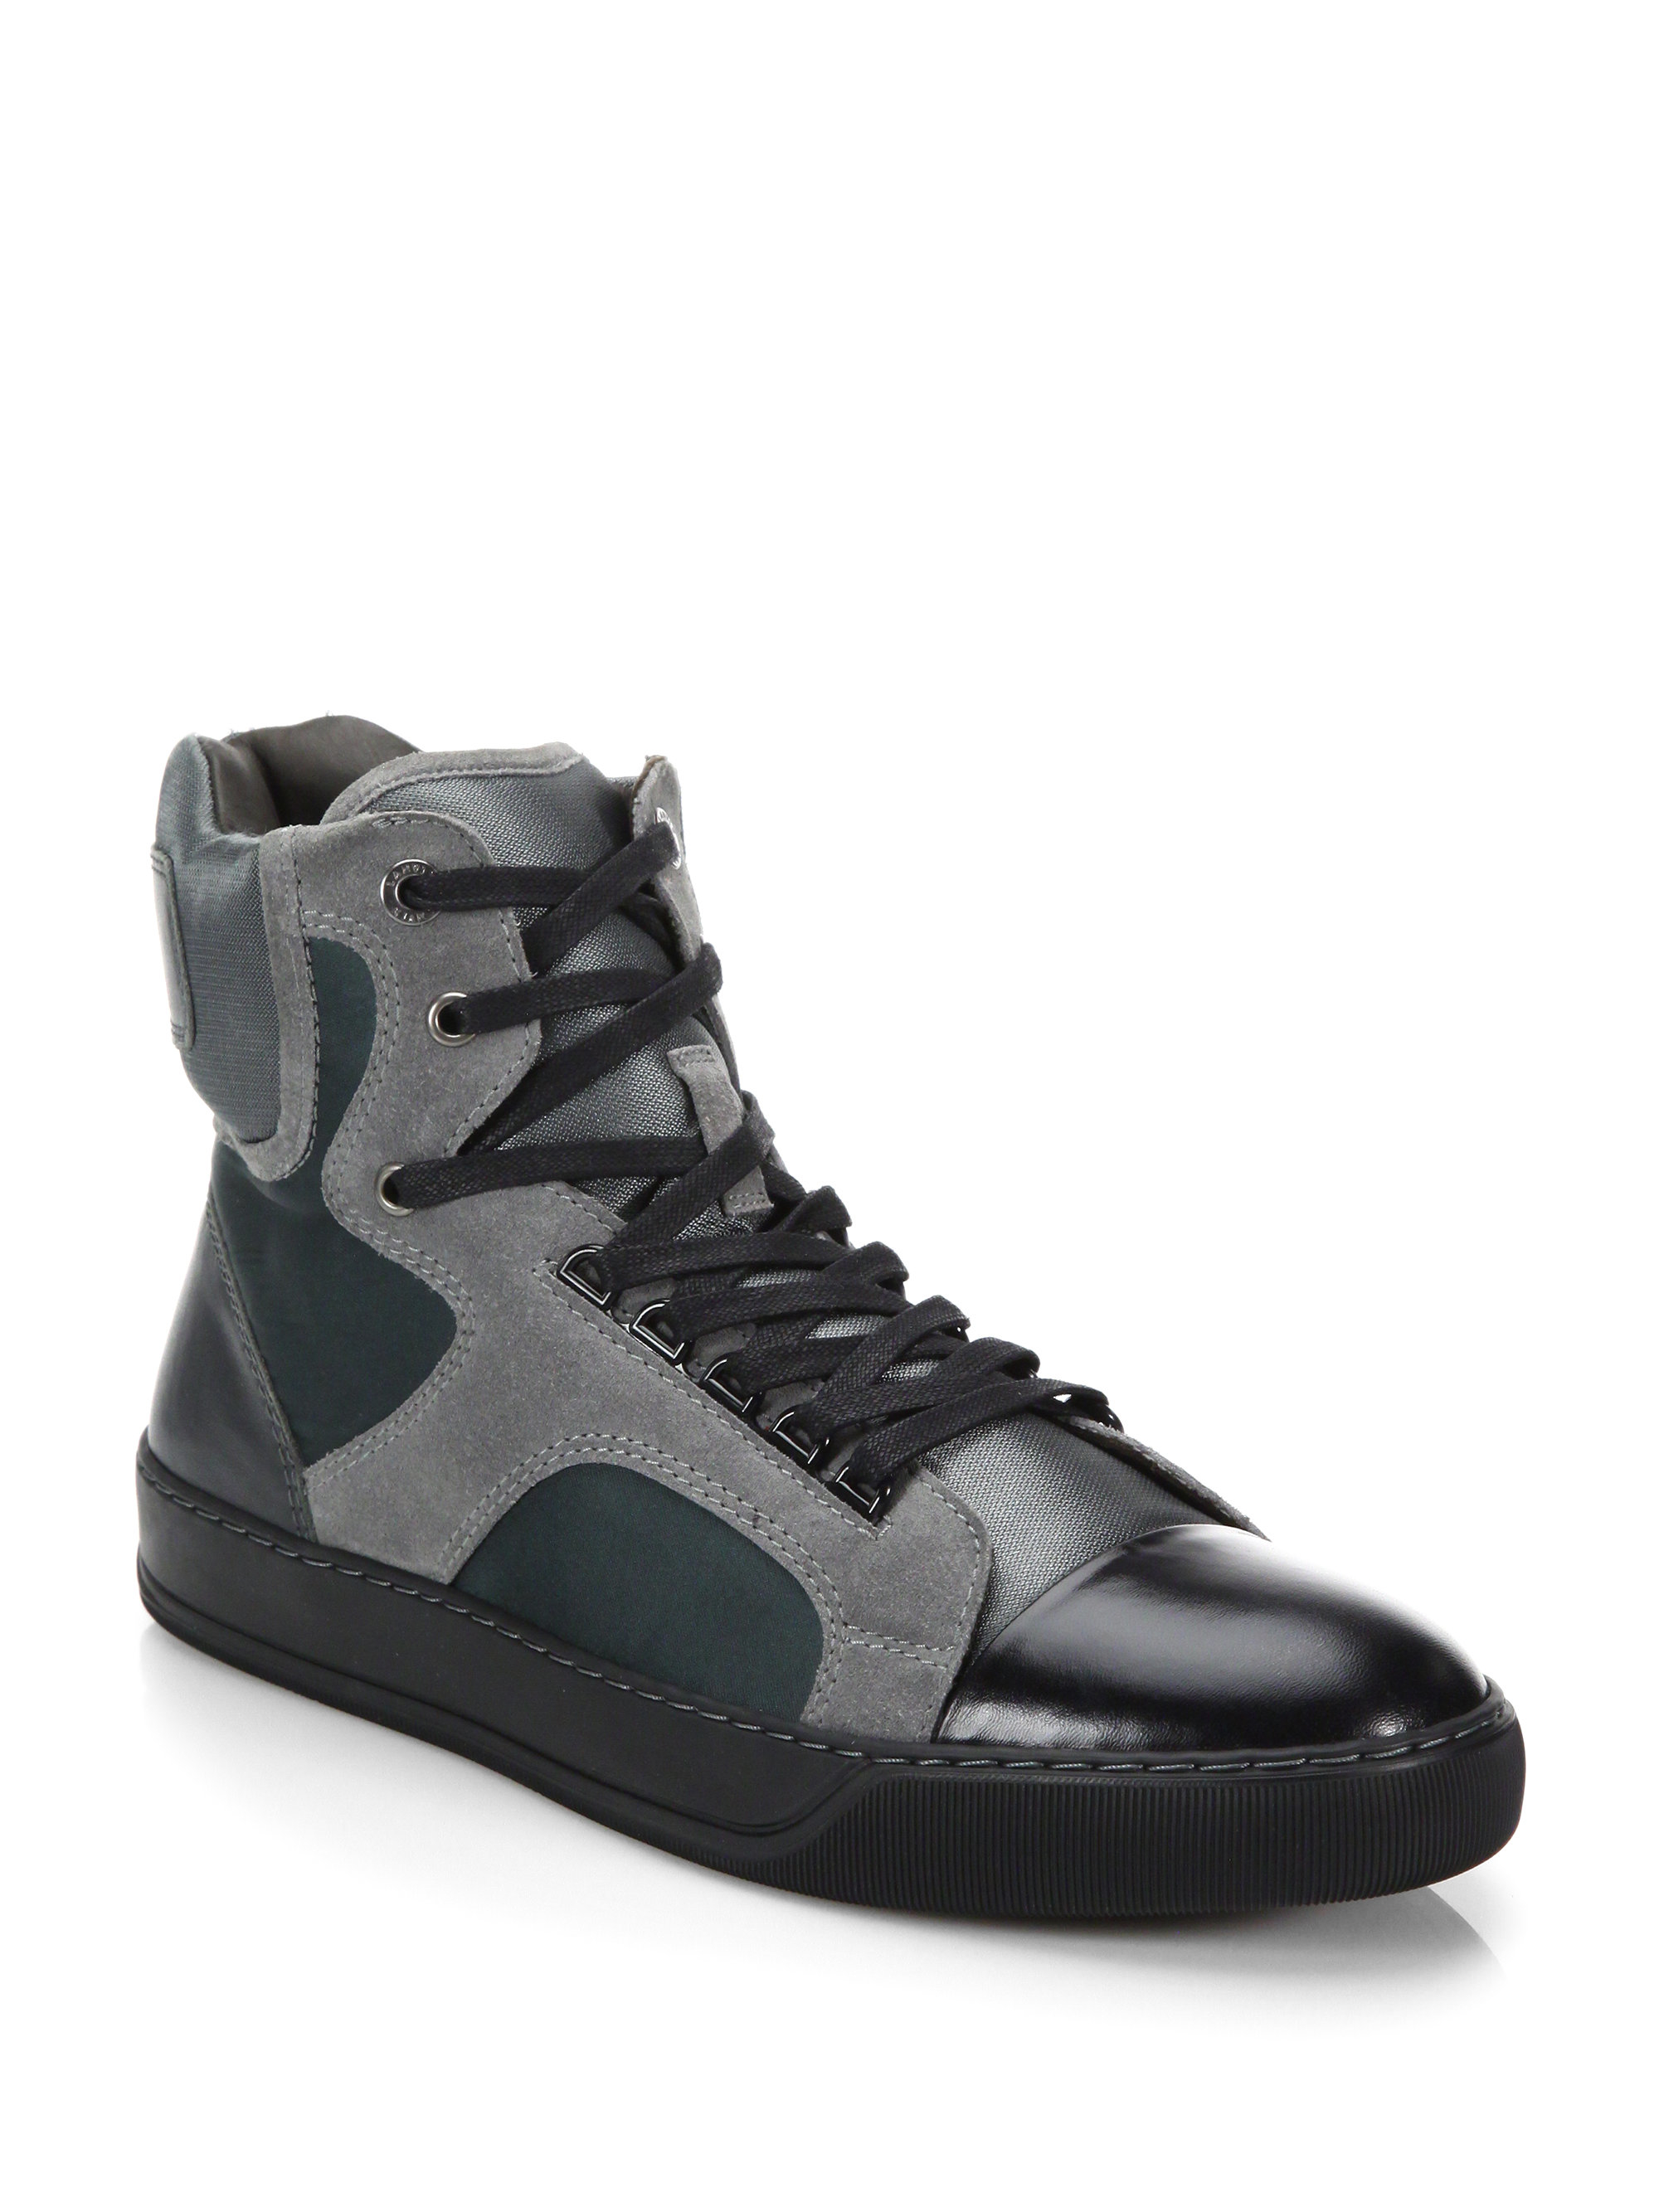 Lanvin Satin Classic Leather & Rubber High-top Sneakers in Gray for Men ...